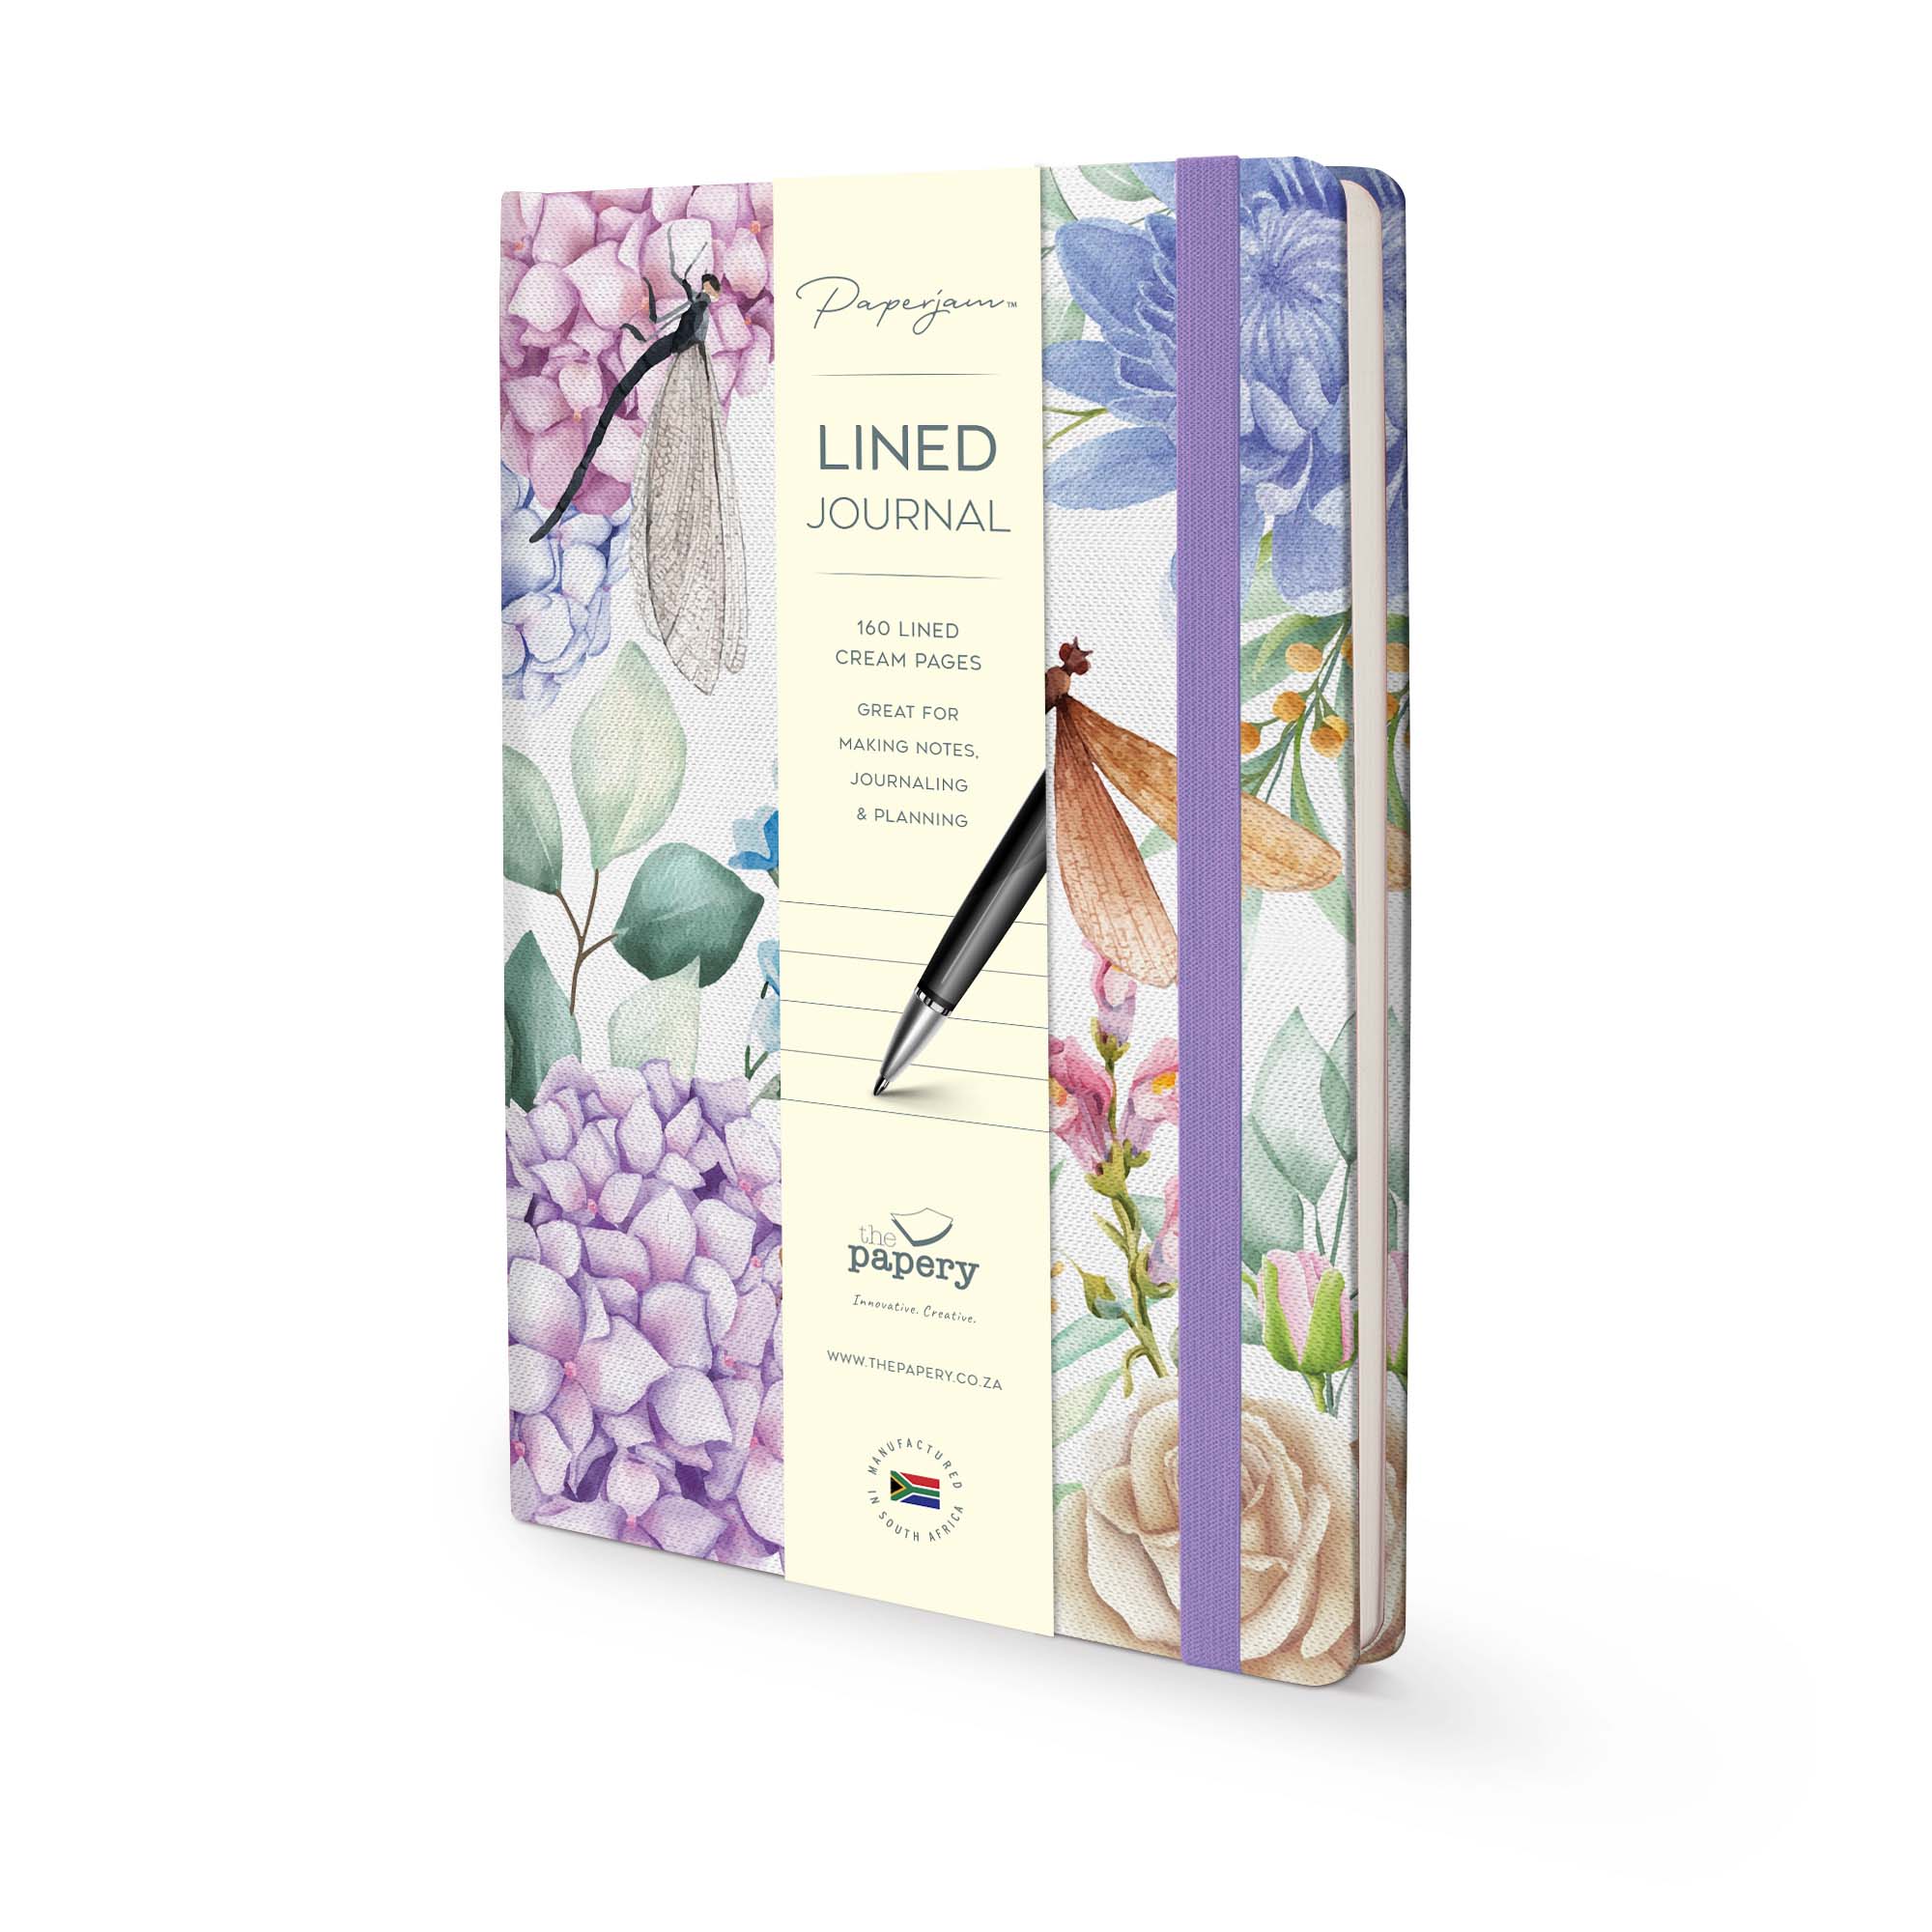 Image shows a dragonflies lined journal